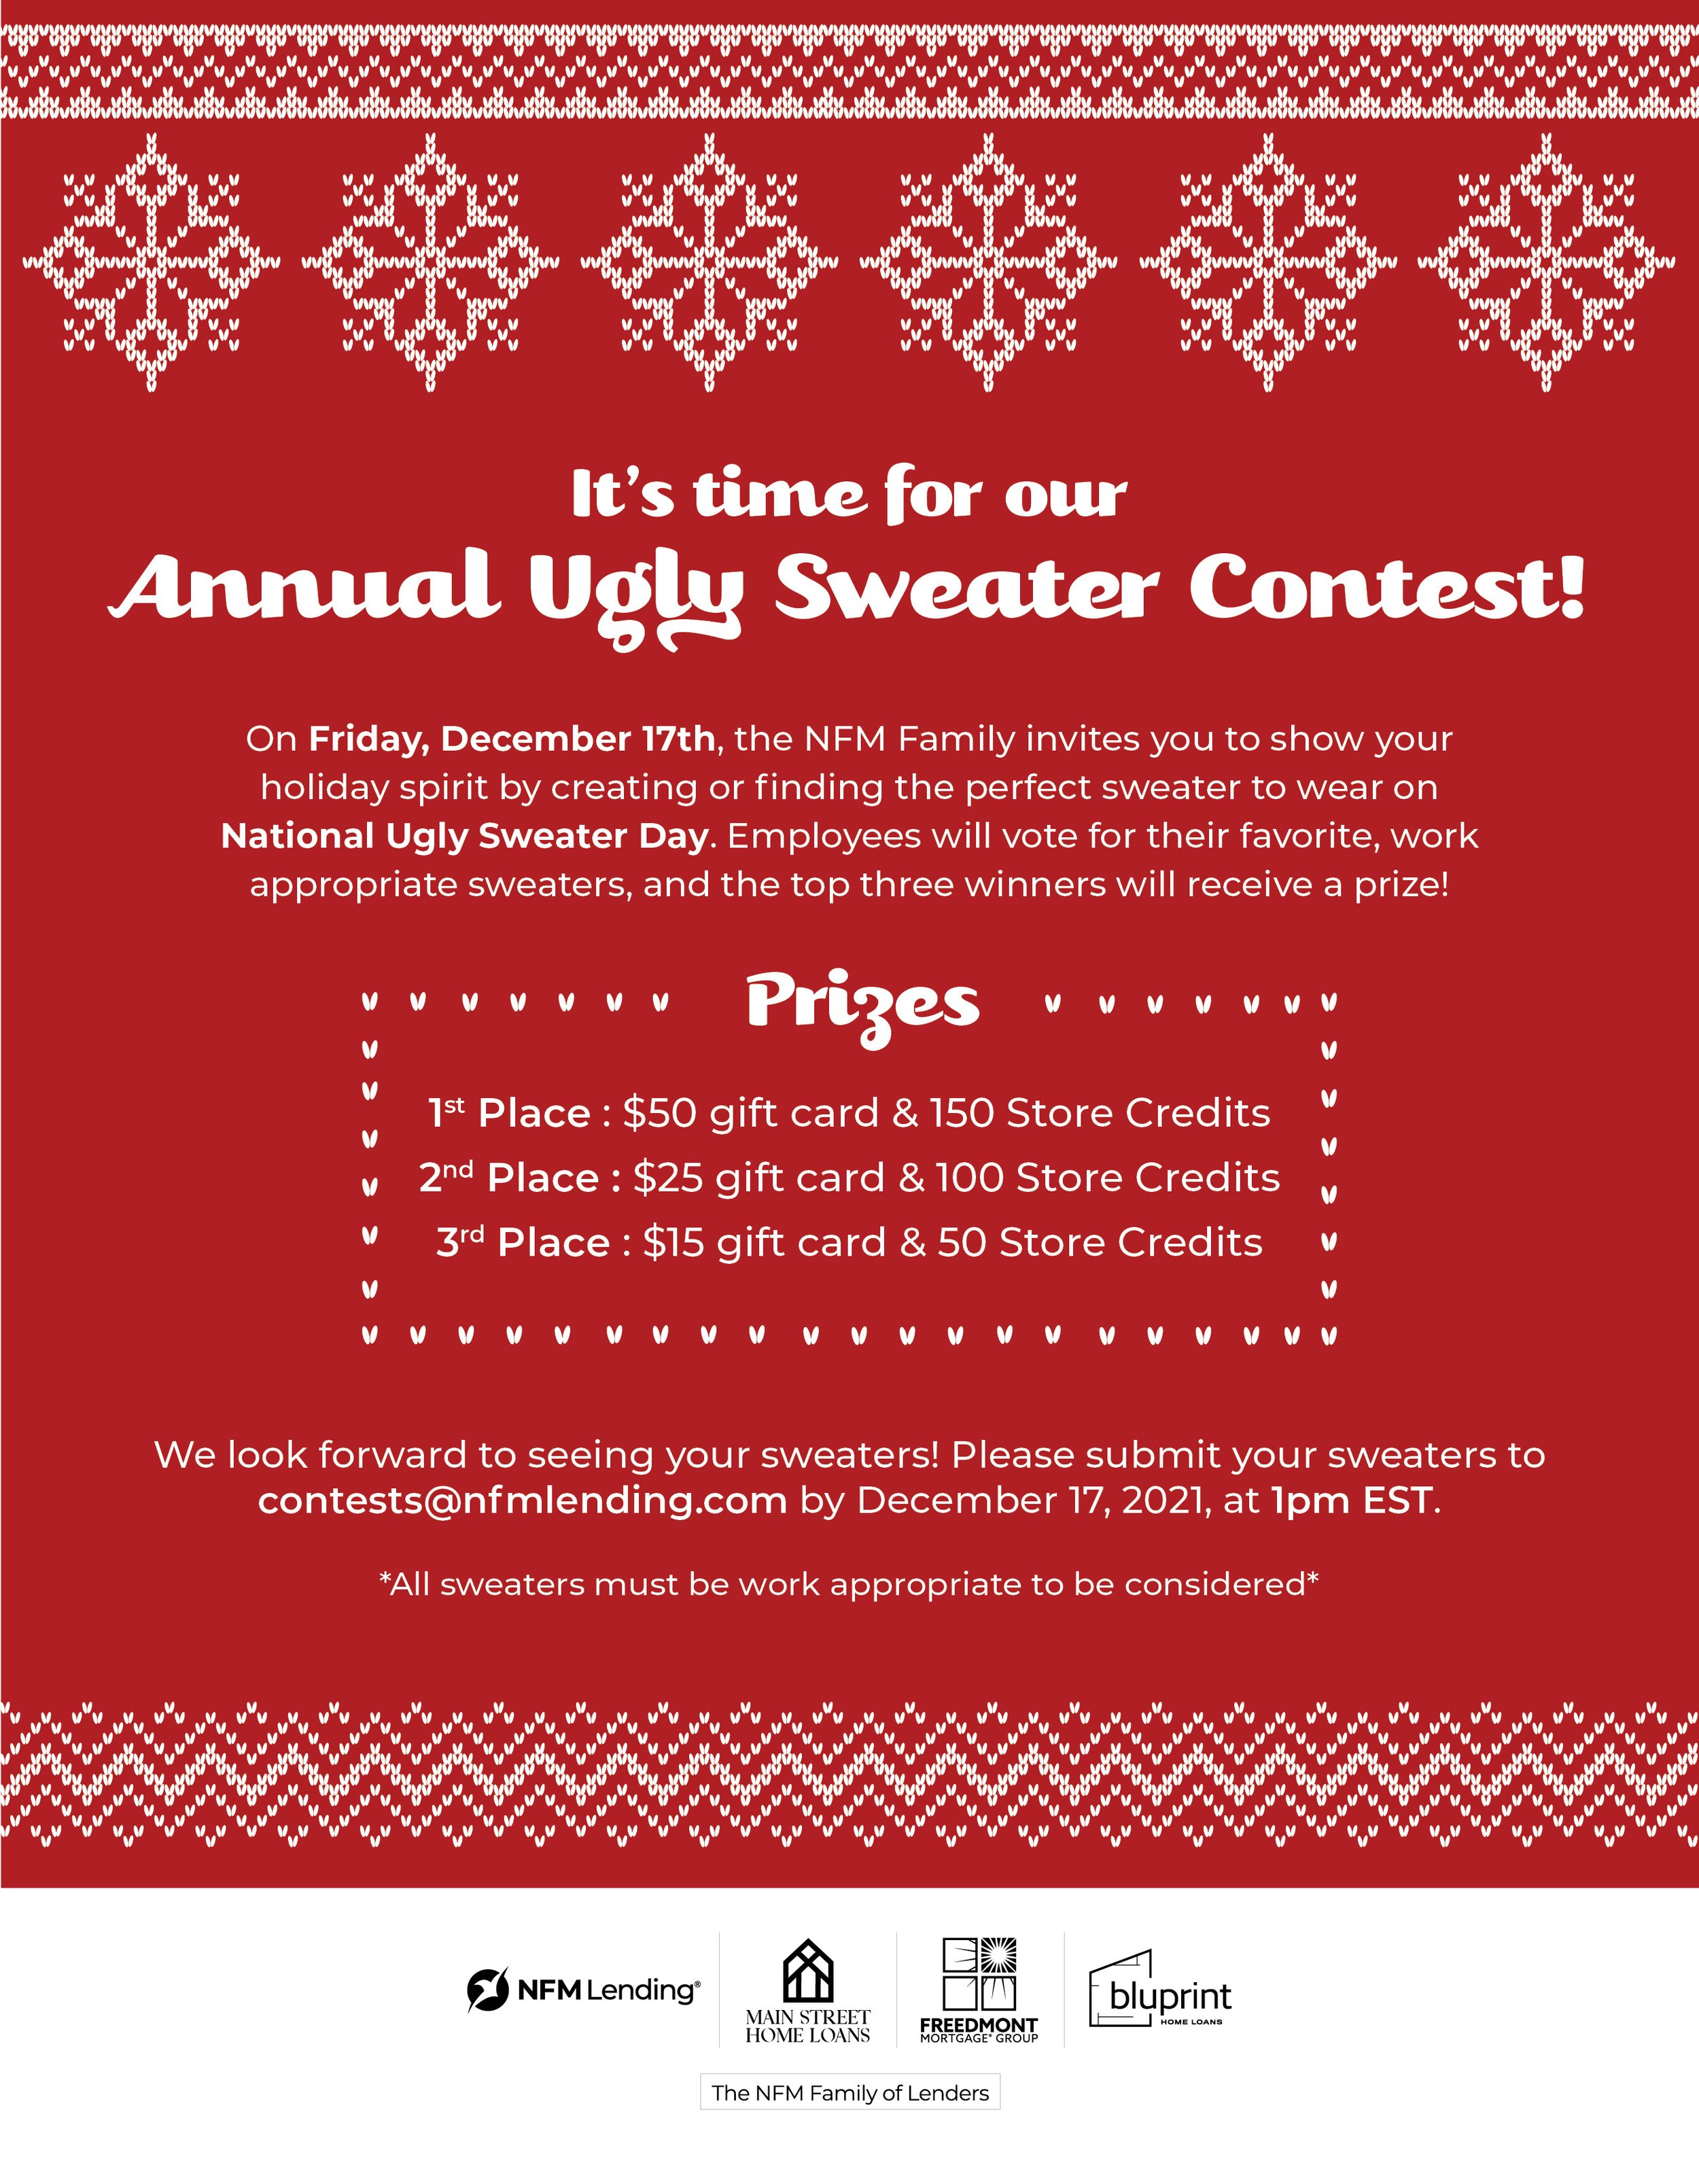 Ugly Sweater Contest_2021.jpg